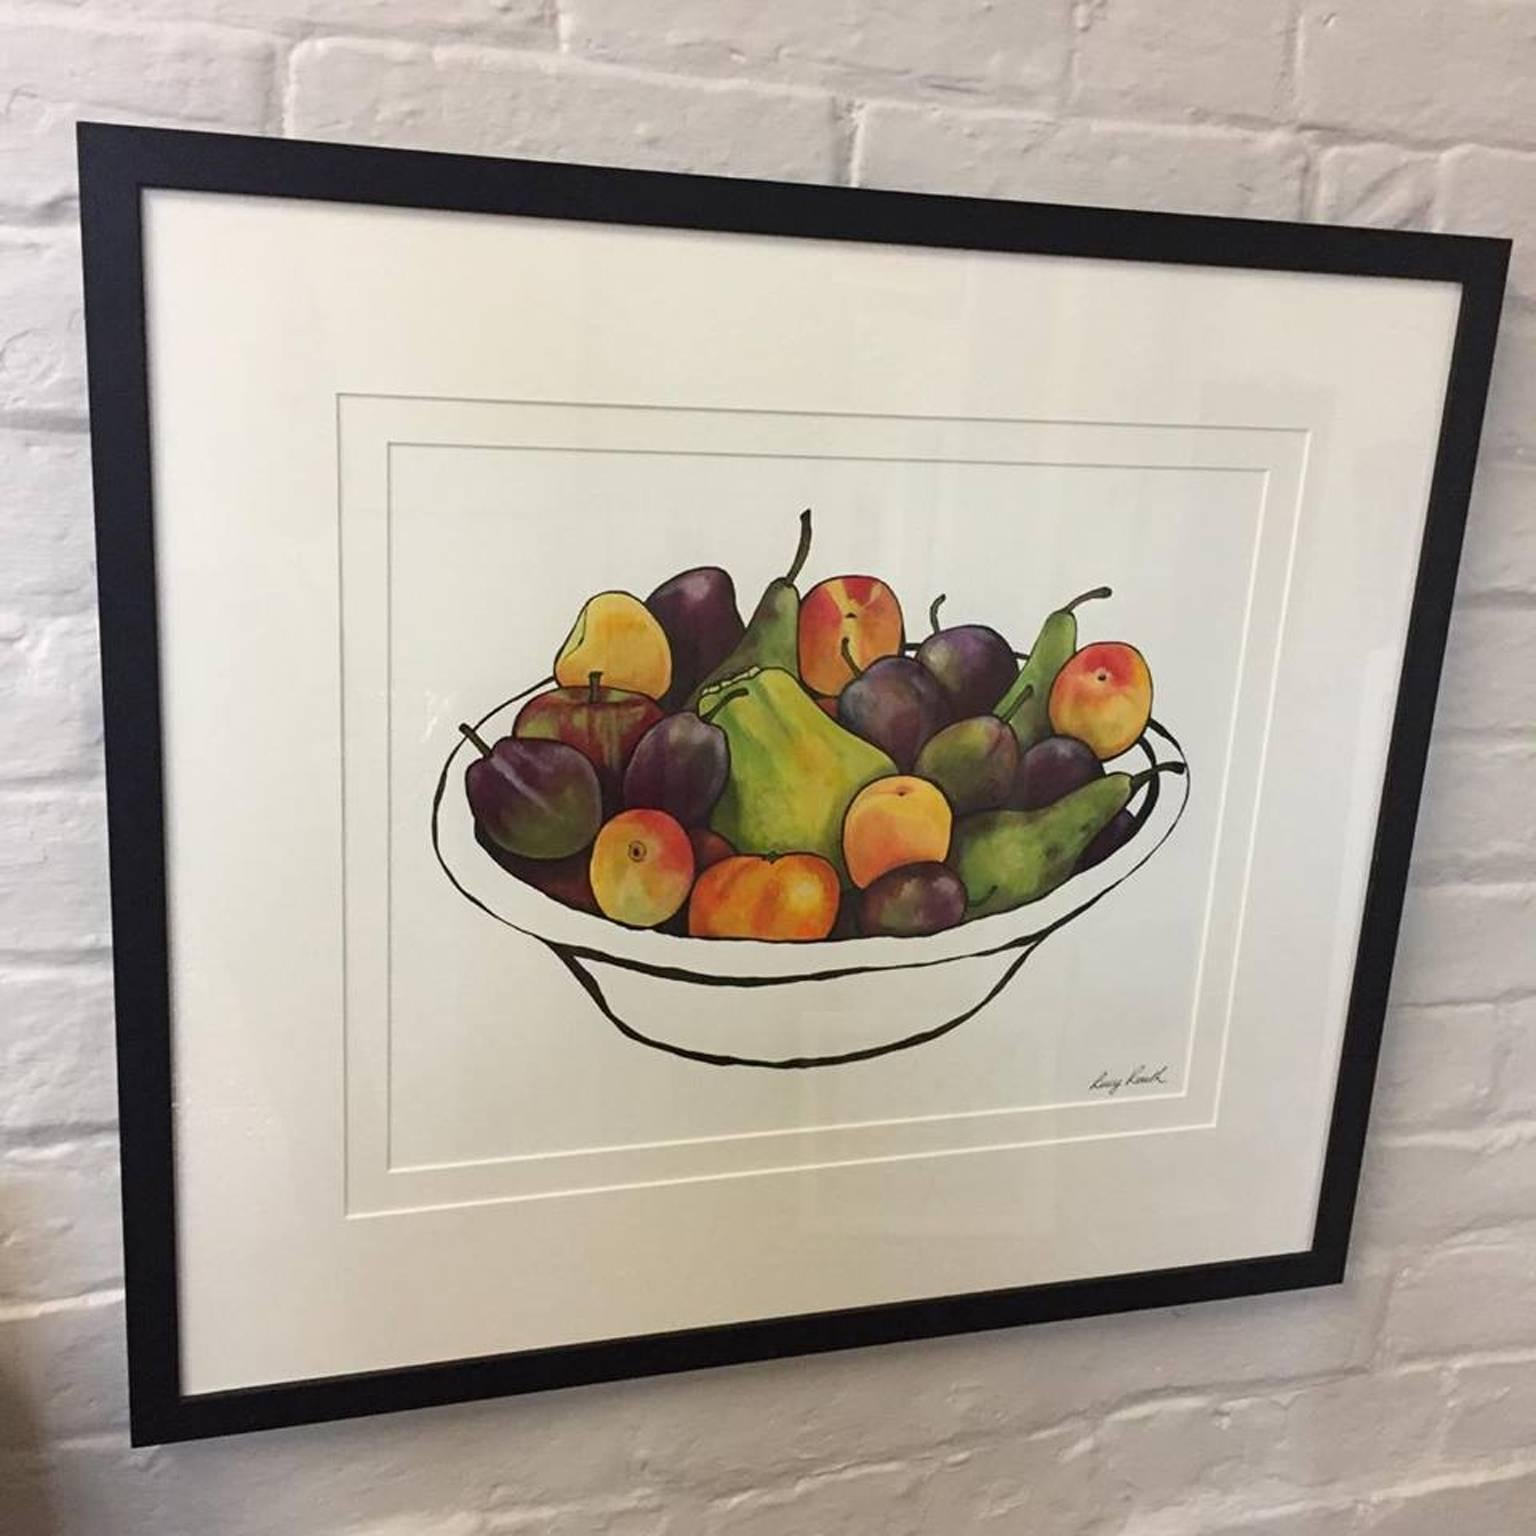 Fruit Bowl with Papaya - Painting by Lucy Routh